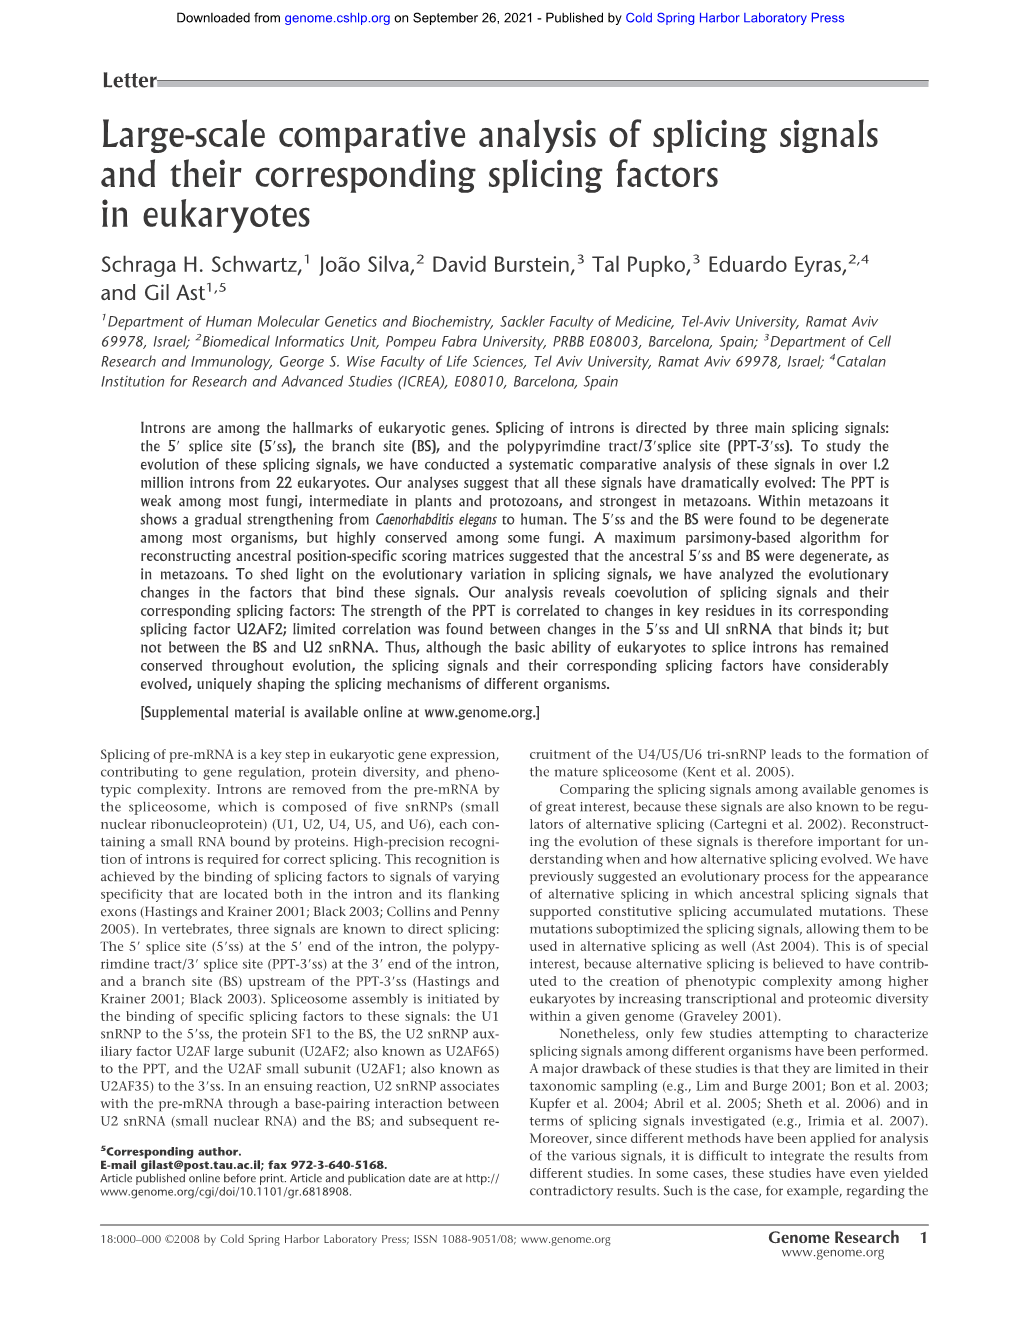 Large-Scale Comparative Analysis of Splicing Signals and Their Corresponding Splicing Factors in Eukaryotes